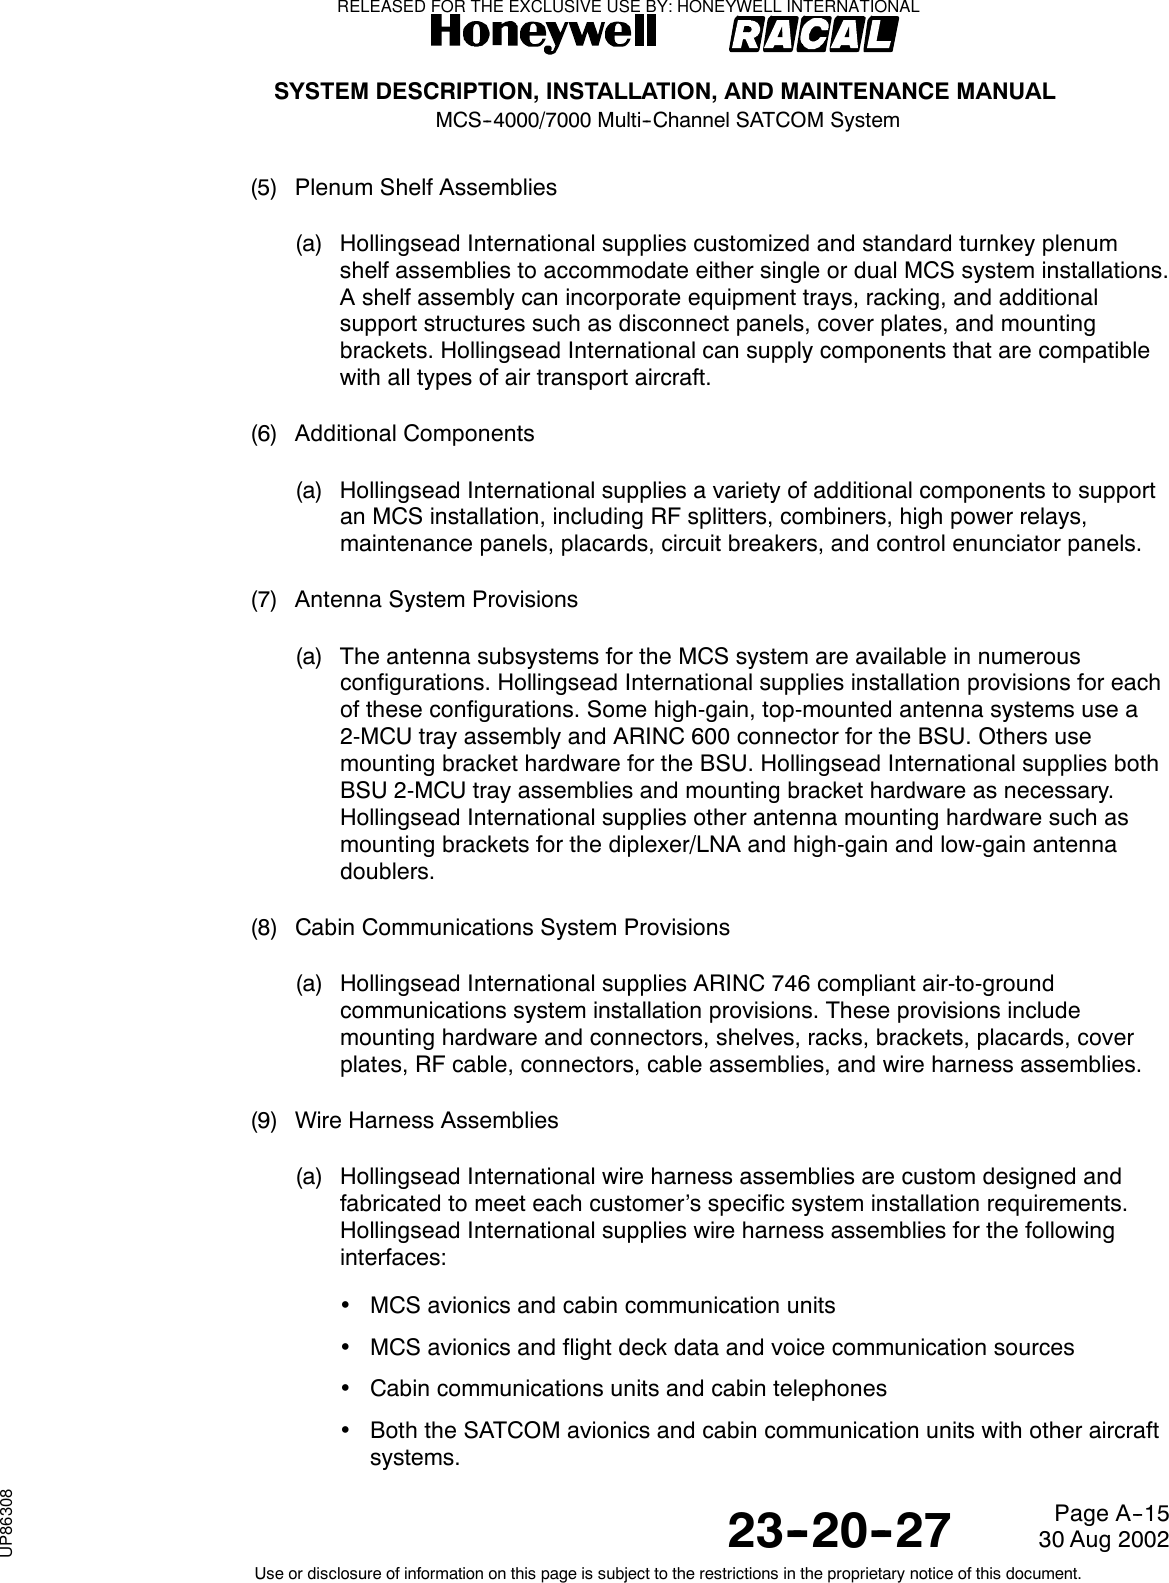 SYSTEM DESCRIPTION, INSTALLATION, AND MAINTENANCE MANUALMCS--4000/7000 Multi--Channel SATCOM System23--20--2730 Aug 2002Use or disclosure of information on this page is subject to the restrictions in the proprietary notice of this document.Page A--15(5) Plenum Shelf Assemblies(a) Hollingsead International supplies customized and standard turnkey plenumshelf assemblies to accommodate either single or dual MCS system installations.A shelf assembly can incorporate equipment trays, racking, and additionalsupport structures such as disconnect panels, cover plates, and mountingbrackets. Hollingsead International can supply components that are compatiblewith all types of air transport aircraft.(6) Additional Components(a) Hollingsead International supplies a variety of additional components to supportan MCS installation, including RF splitters, combiners, high power relays,maintenance panels, placards, circuit breakers, and control enunciator panels.(7) Antenna System Provisions(a) The antenna subsystems for the MCS system are available in numerousconfigurations. Hollingsead International supplies installation provisions for eachof these configurations. Some high-gain, top-mounted antenna systems use a2-MCU tray assembly and ARINC 600 connector for the BSU. Others usemounting bracket hardware for the BSU. Hollingsead International supplies bothBSU 2-MCU tray assemblies and mounting bracket hardware as necessary.Hollingsead International supplies other antenna mounting hardware such asmounting brackets for the diplexer/LNA and high-gain and low-gain antennadoublers.(8) Cabin Communications System Provisions(a) Hollingsead International supplies ARINC 746 compliant air-to-groundcommunications system installation provisions. These provisions includemounting hardware and connectors, shelves, racks, brackets, placards, coverplates, RF cable, connectors, cable assemblies, and wire harness assemblies.(9) Wire Harness Assemblies(a) Hollingsead International wire harness assemblies are custom designed andfabricated to meet each customer’s specific system installation requirements.Hollingsead International supplies wire harness assemblies for the followinginterfaces:•MCS avionics and cabin communication units•MCS avionics and flight deck data and voice communication sources•Cabin communications units and cabin telephones•Both the SATCOM avionics and cabin communication units with other aircraftsystems.RELEASED FOR THE EXCLUSIVE USE BY: HONEYWELL INTERNATIONALUP86308